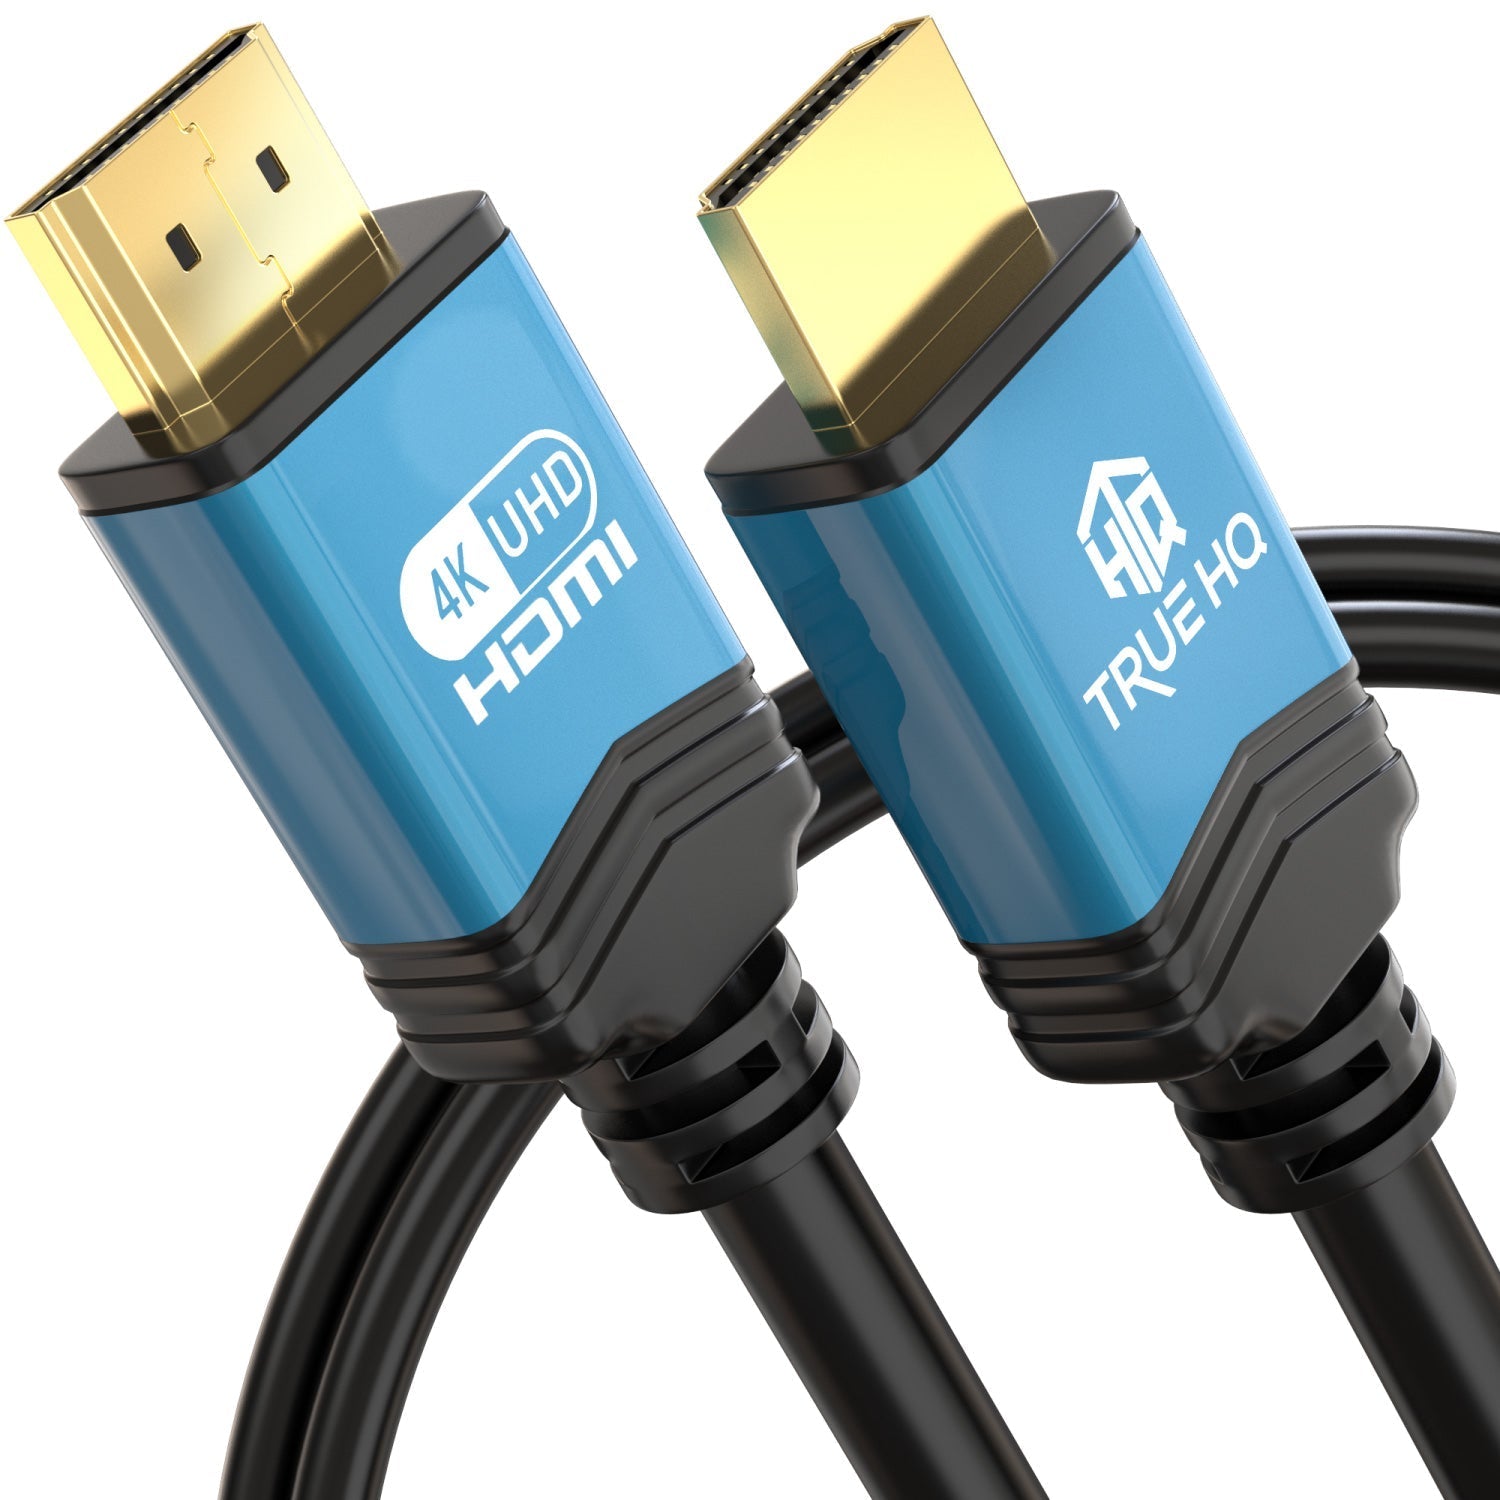 4K HDMI CABLE 7.5M HDMI LEAD BY TRUE HQ | DESIGNED IN THE UK | ULTRA HIGH SPEED 18GBPS HDMI 2.0 CORD WITH ETHERNET